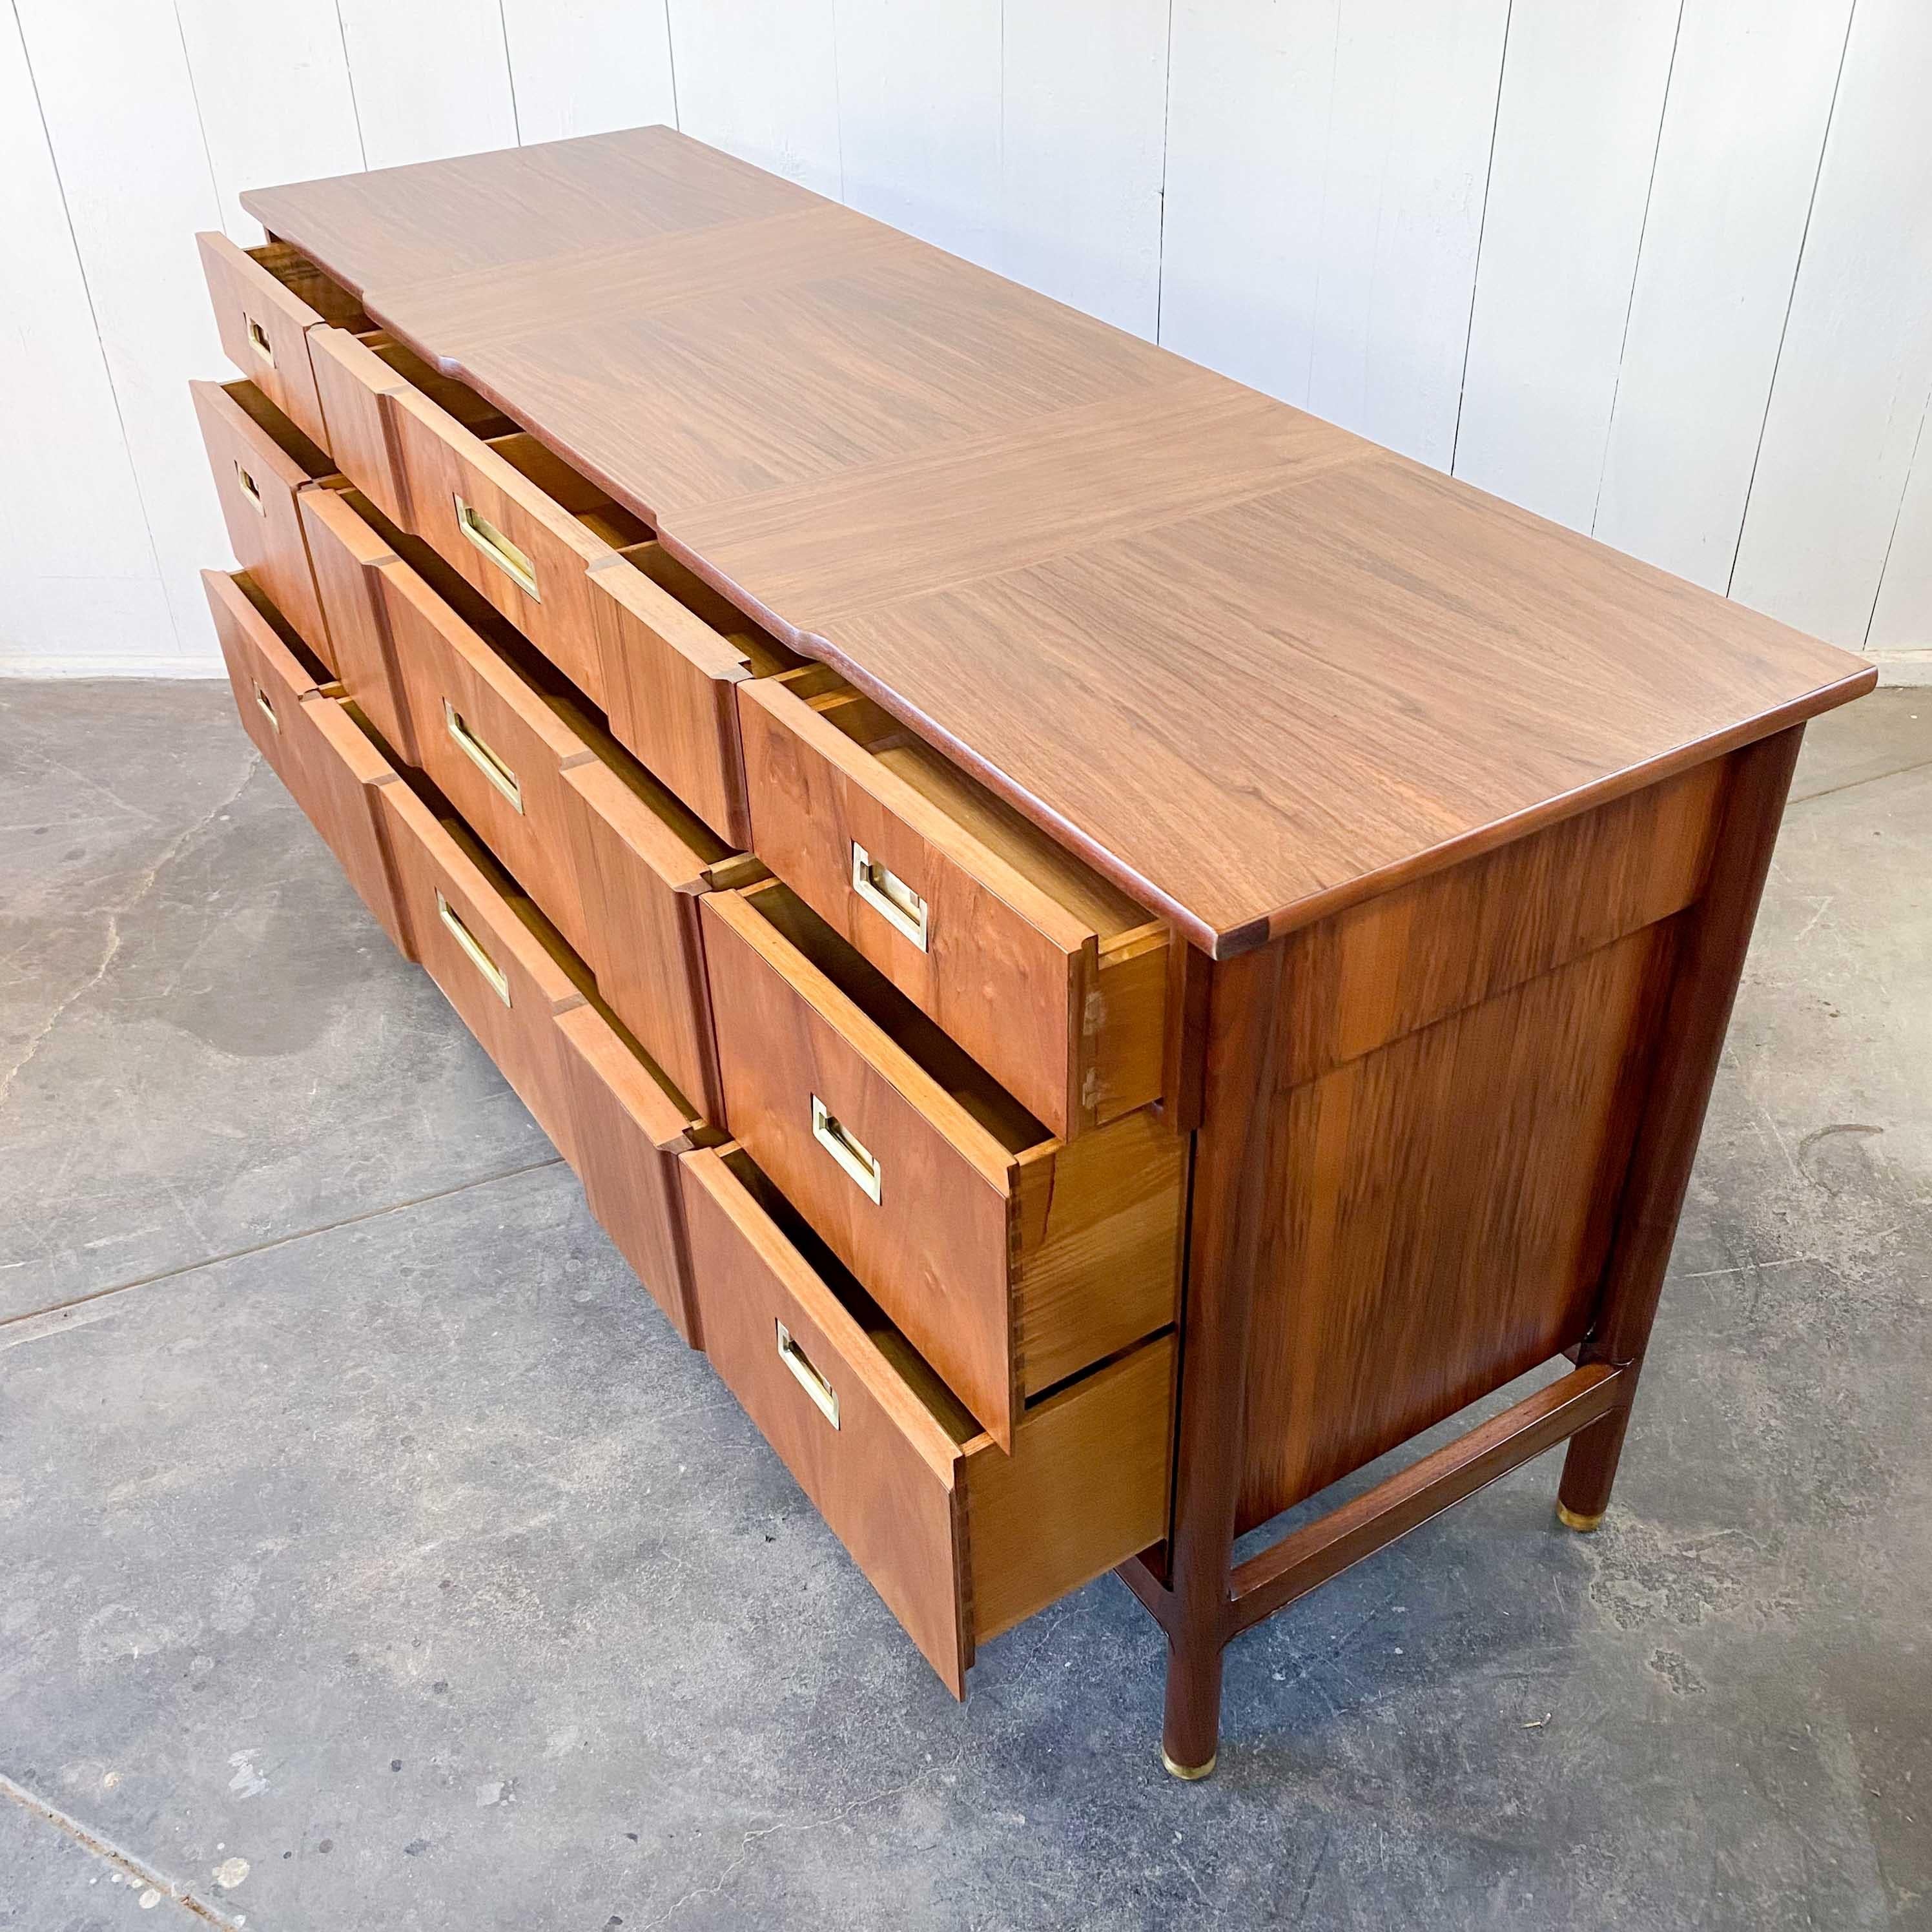 Nine drawer dresser designed by J. Stuart Clingman for John Widdicomb Co. prior to his death in 1956.
Quarter-cut rosewood framing, sculpted facia, over hanging top drawers, book matched rosewood veneer with cut back side panels, brass sabots and